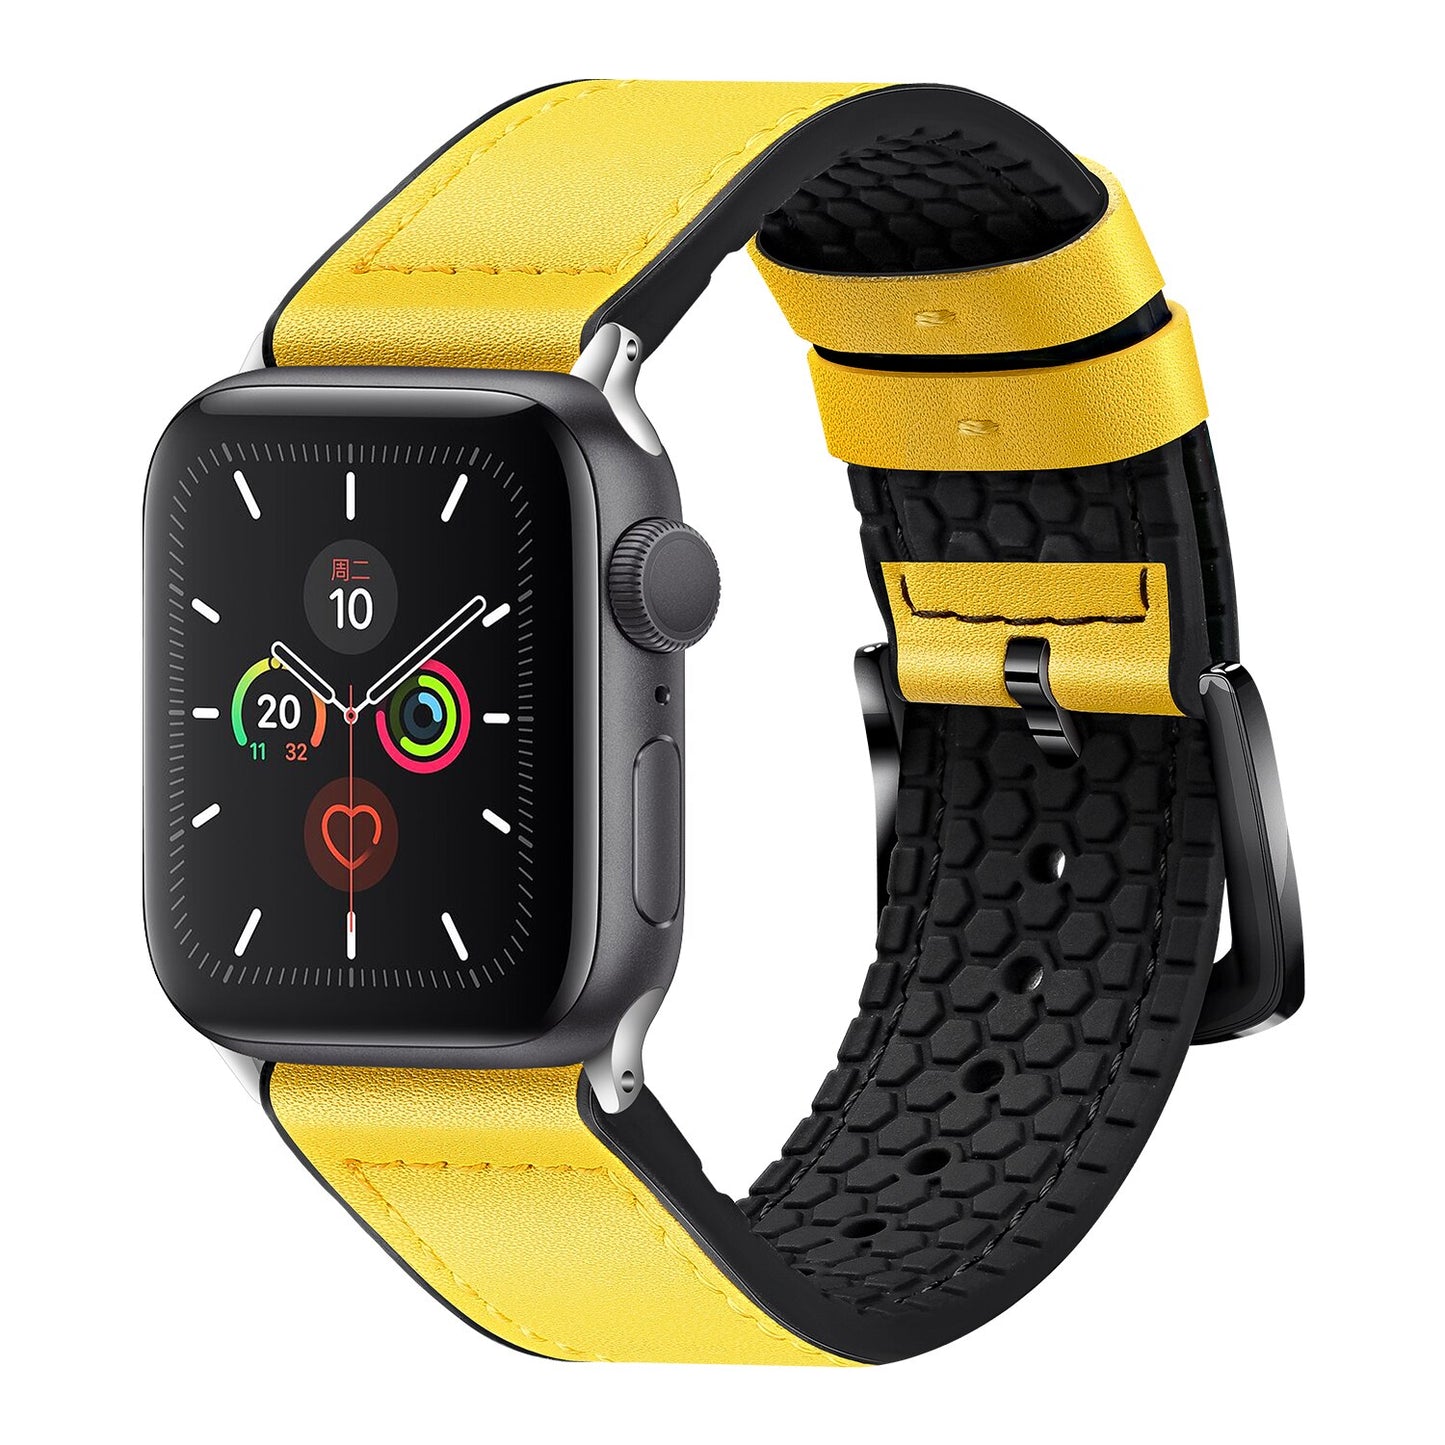 iWatch Strap For 44mm 42mm 40mm 38mm Leather Strap Bracelet Correa Watchband For Smart Watch iWatch Series 5 4 3 2 1 44mm Band